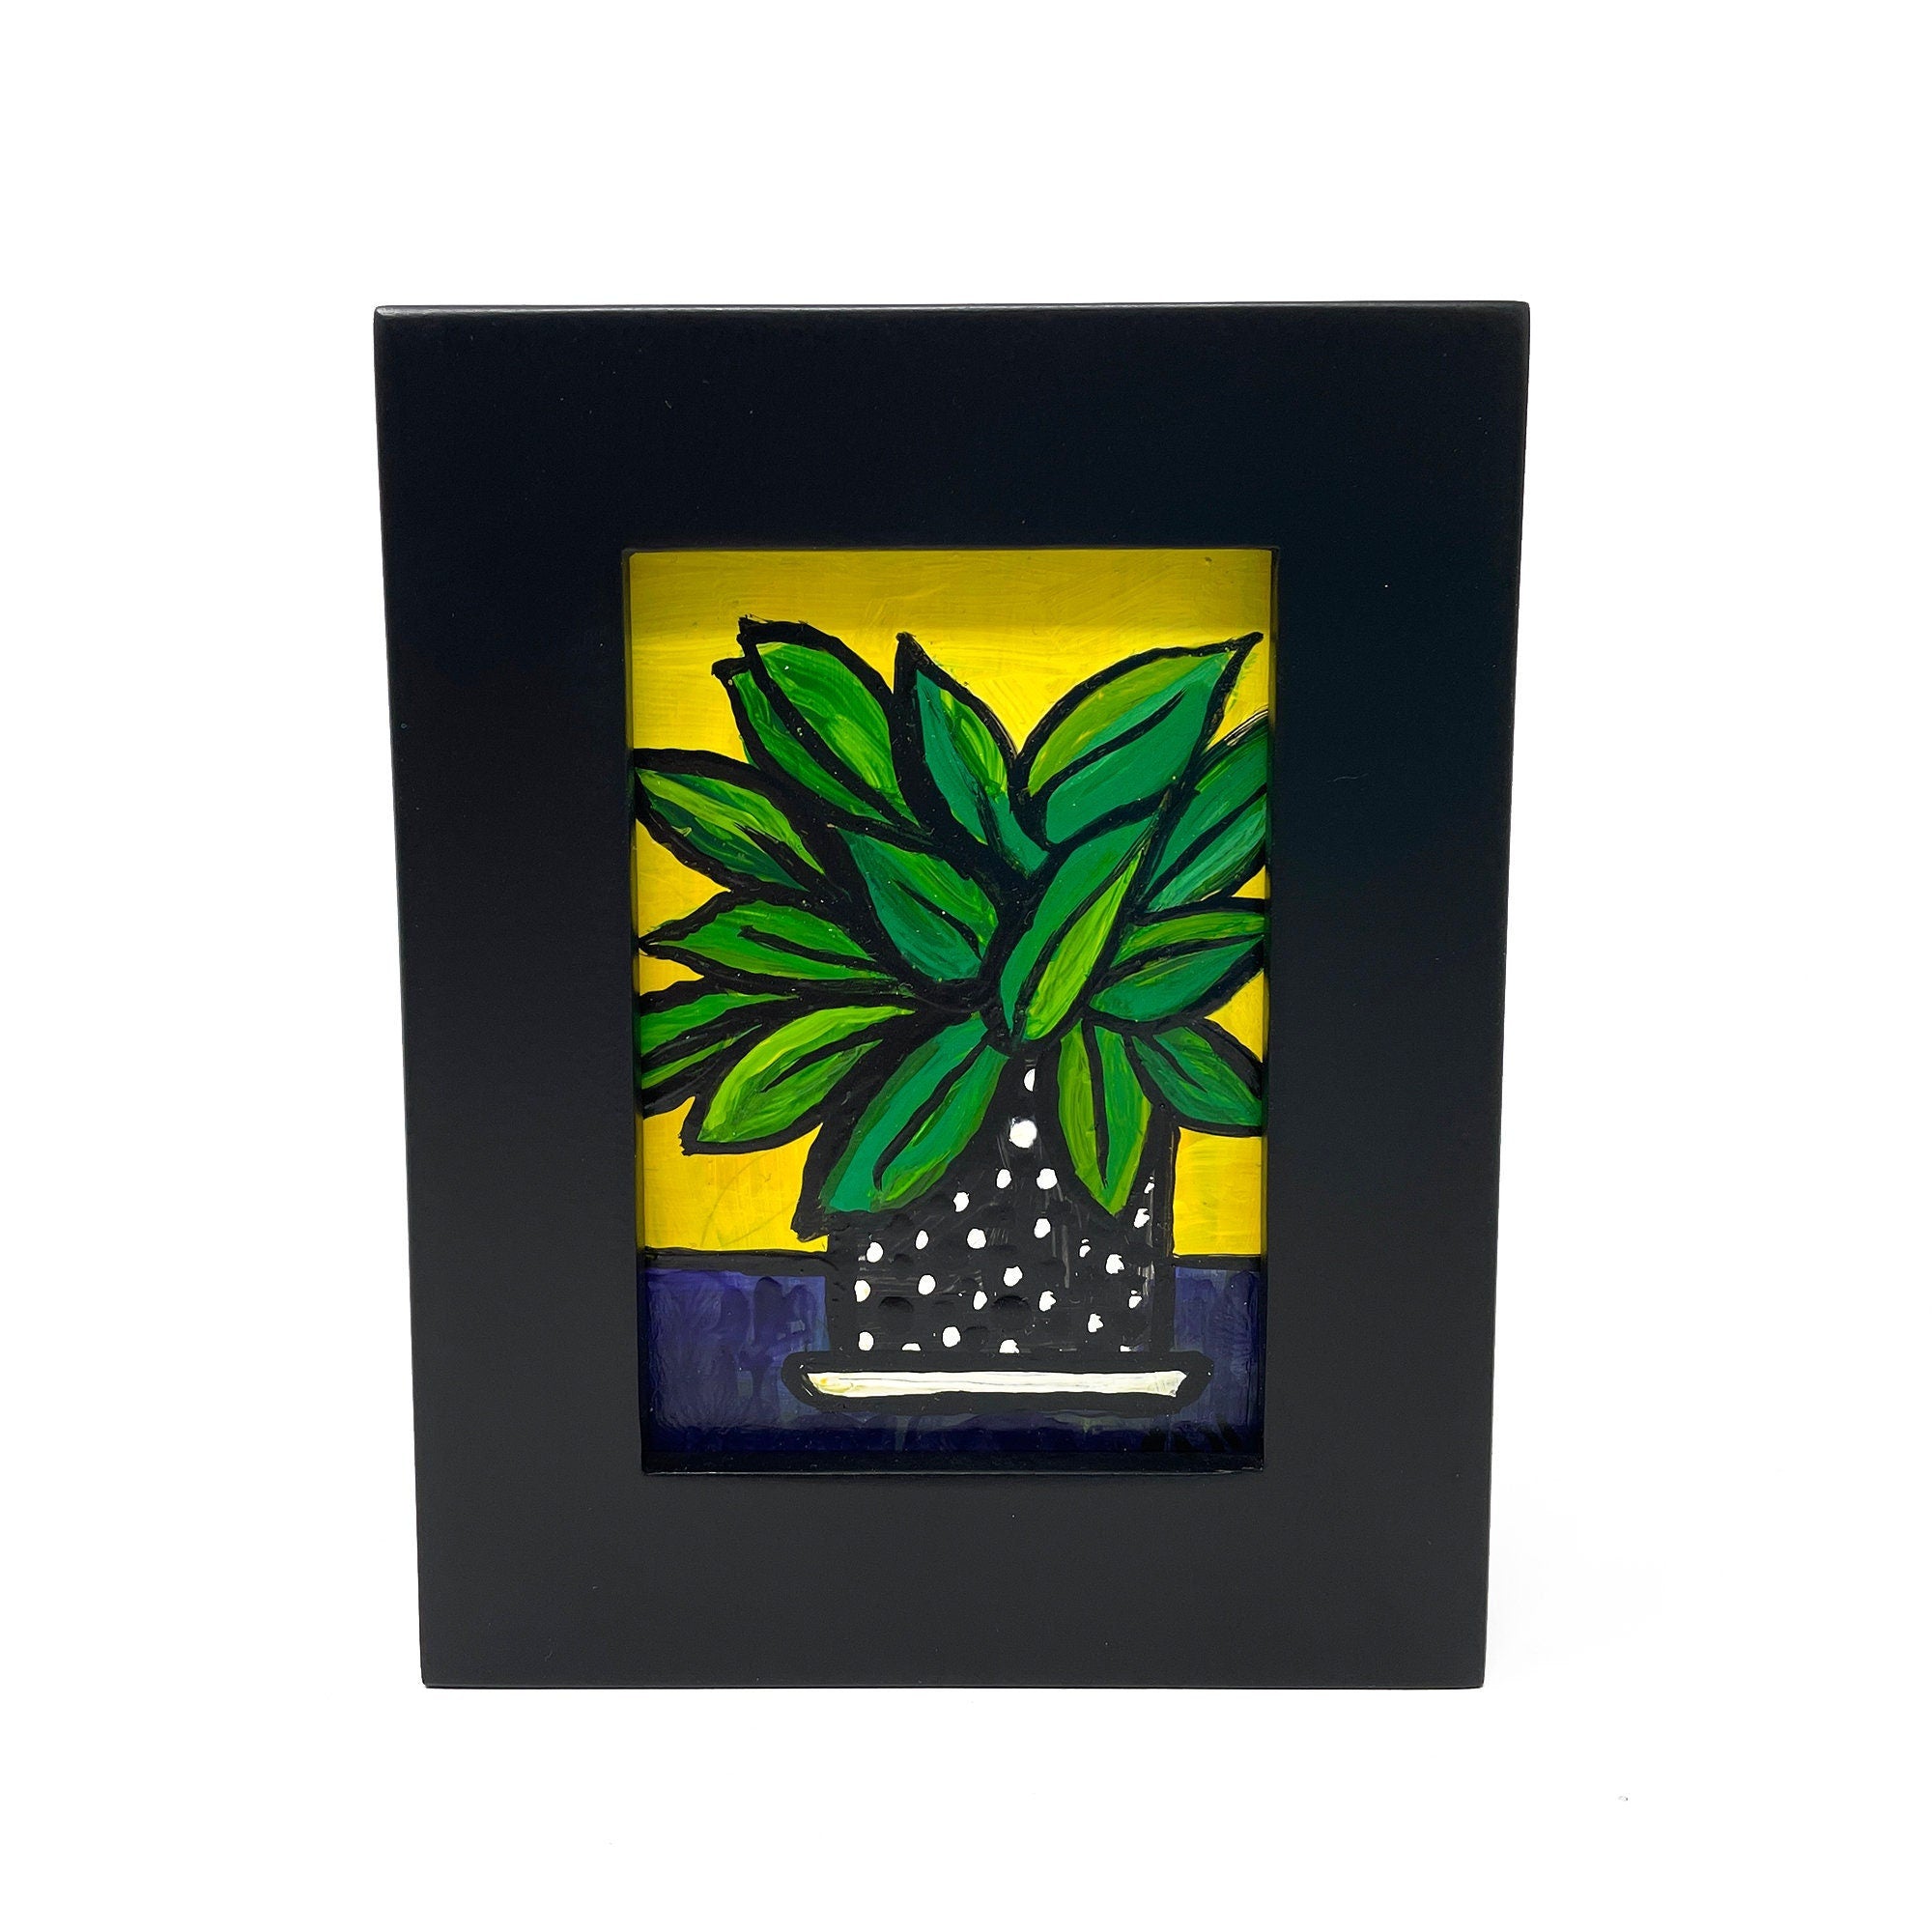 Framed Miniature Plant Painting - Small Plant Still Life Art for Desk, Shelf, or Wall - ACEO